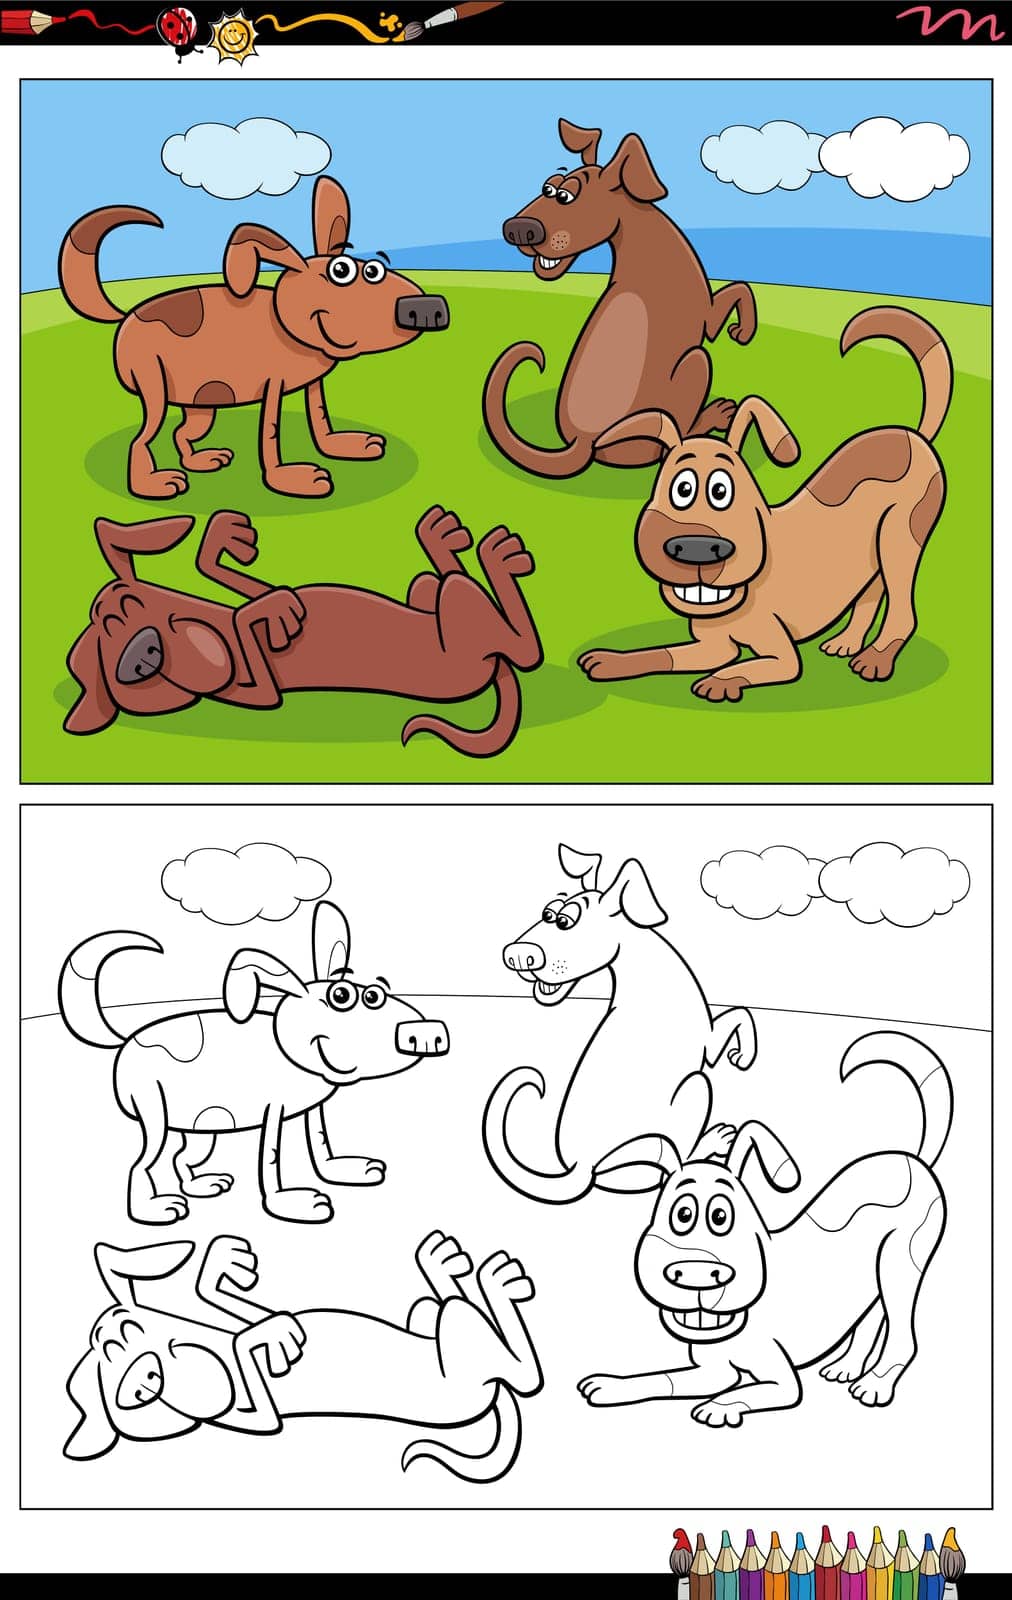 Cartoon illustrations of funny dogs or puppies characters group coloring page